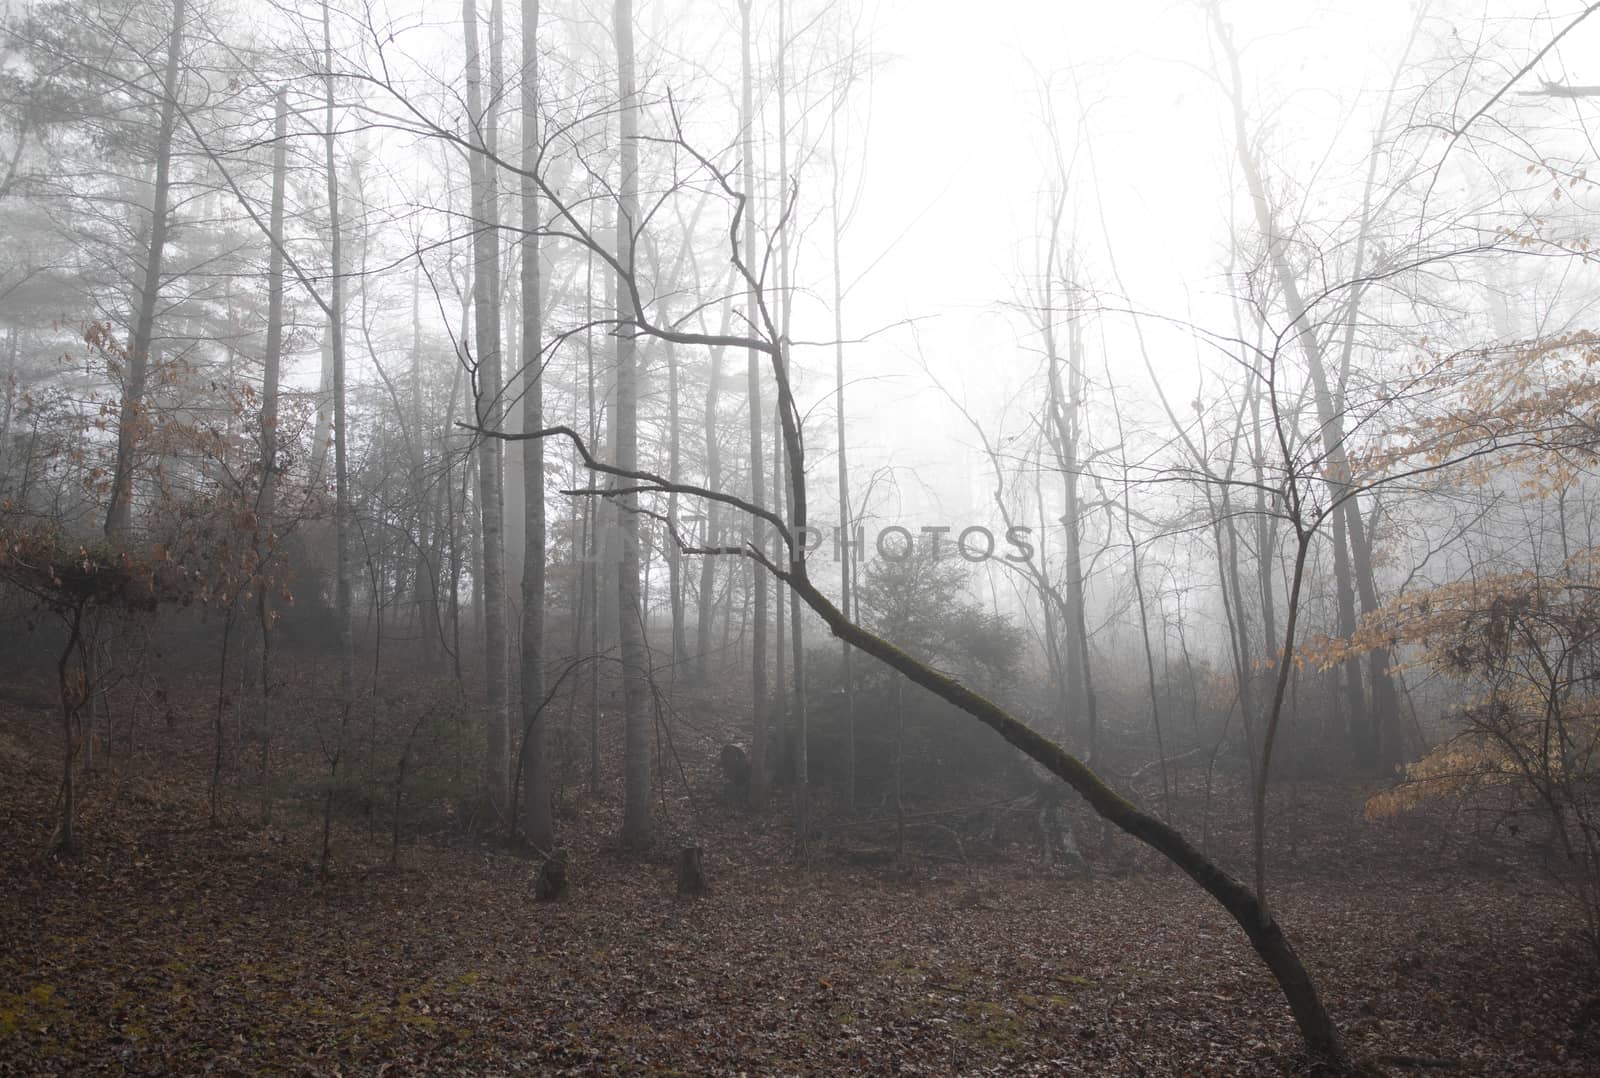 Rural Woodland Clearing on a Foggy Winter Morning by CharlieFloyd